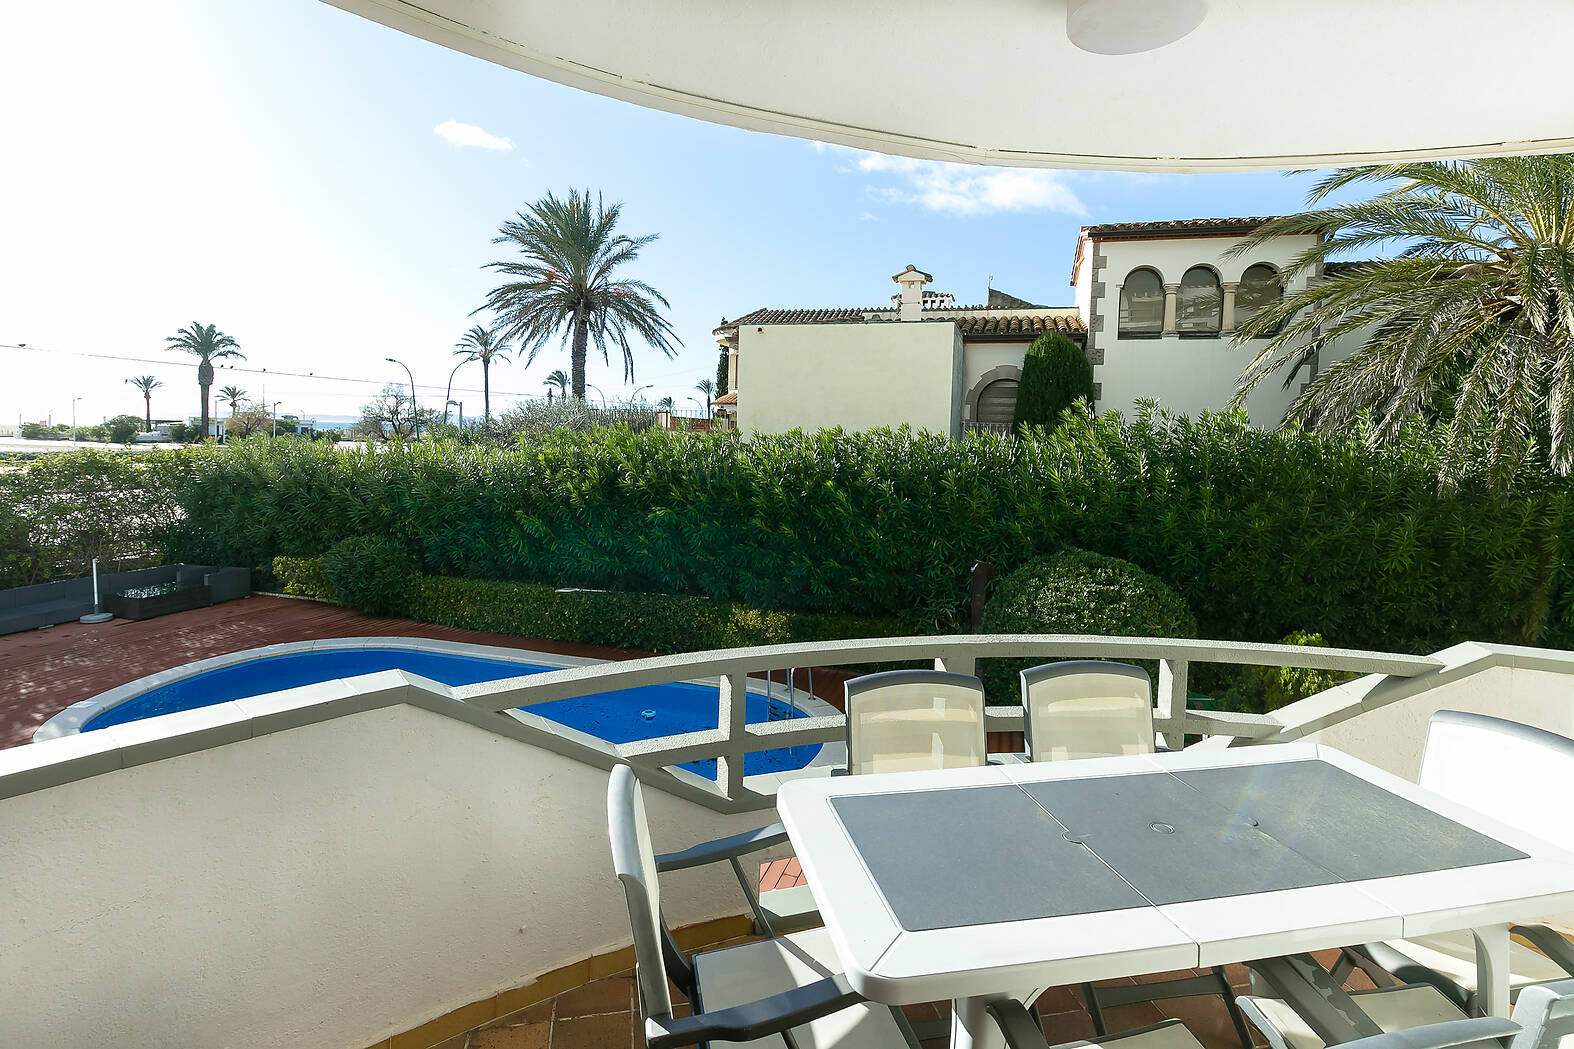 Residence of 6 houses with moorings and pool in Empuriabrava